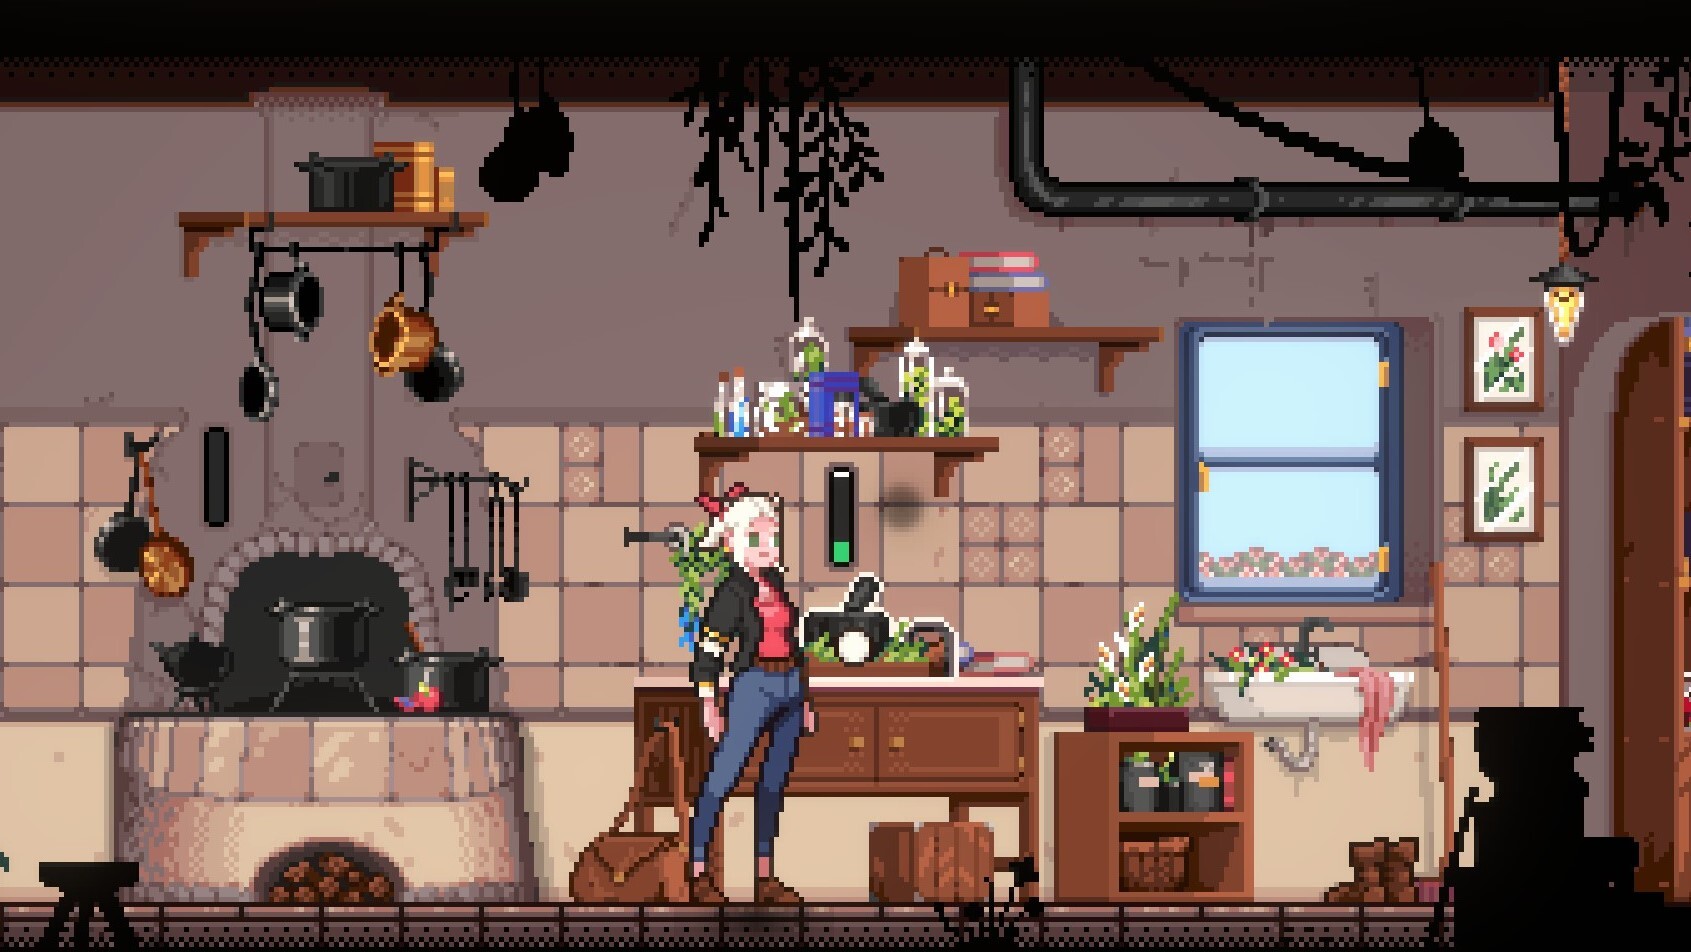  This cozy cooking platformer is so sweet that I went back for seconds of the demo 